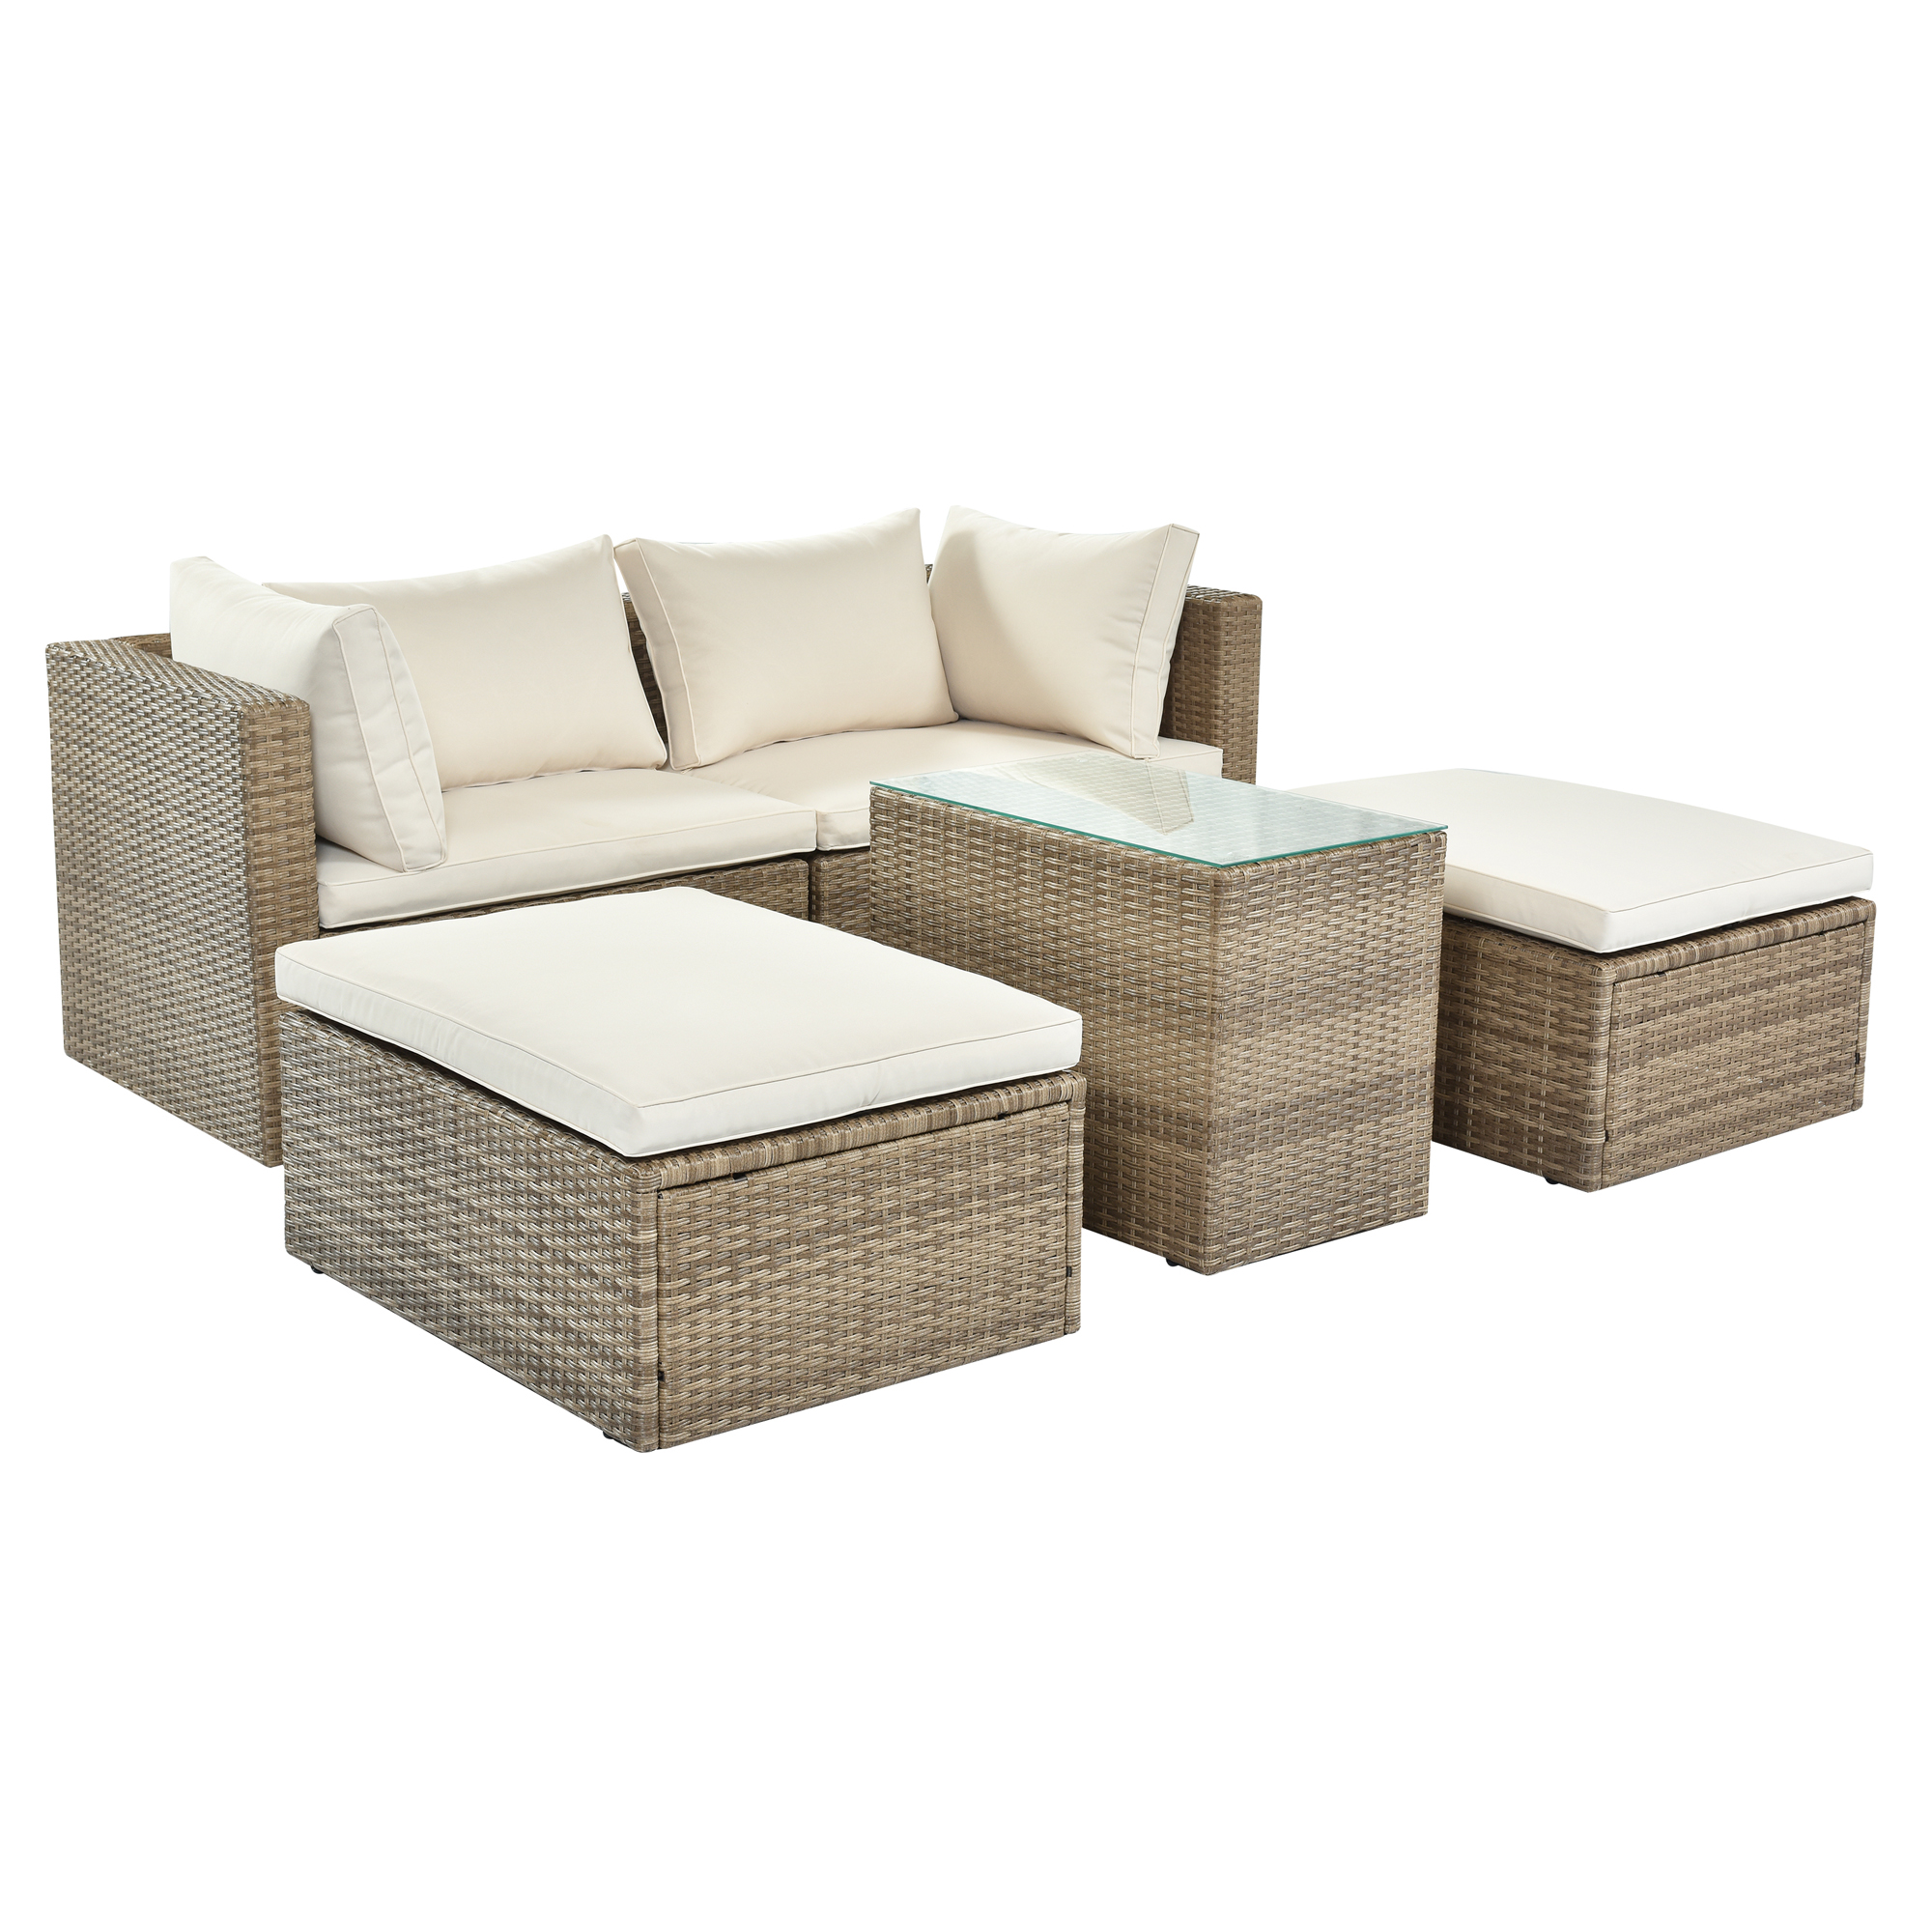 UWR-Nite 5 Piece Wicker Patio Furniture Set, PE Wicker Rattan Small Patio Set Porch Furniture, Cushioned Patio Chairs Set w/Ottoman &Table, Outdoor Lounge Chair Chat Conversation Set - image 2 of 6